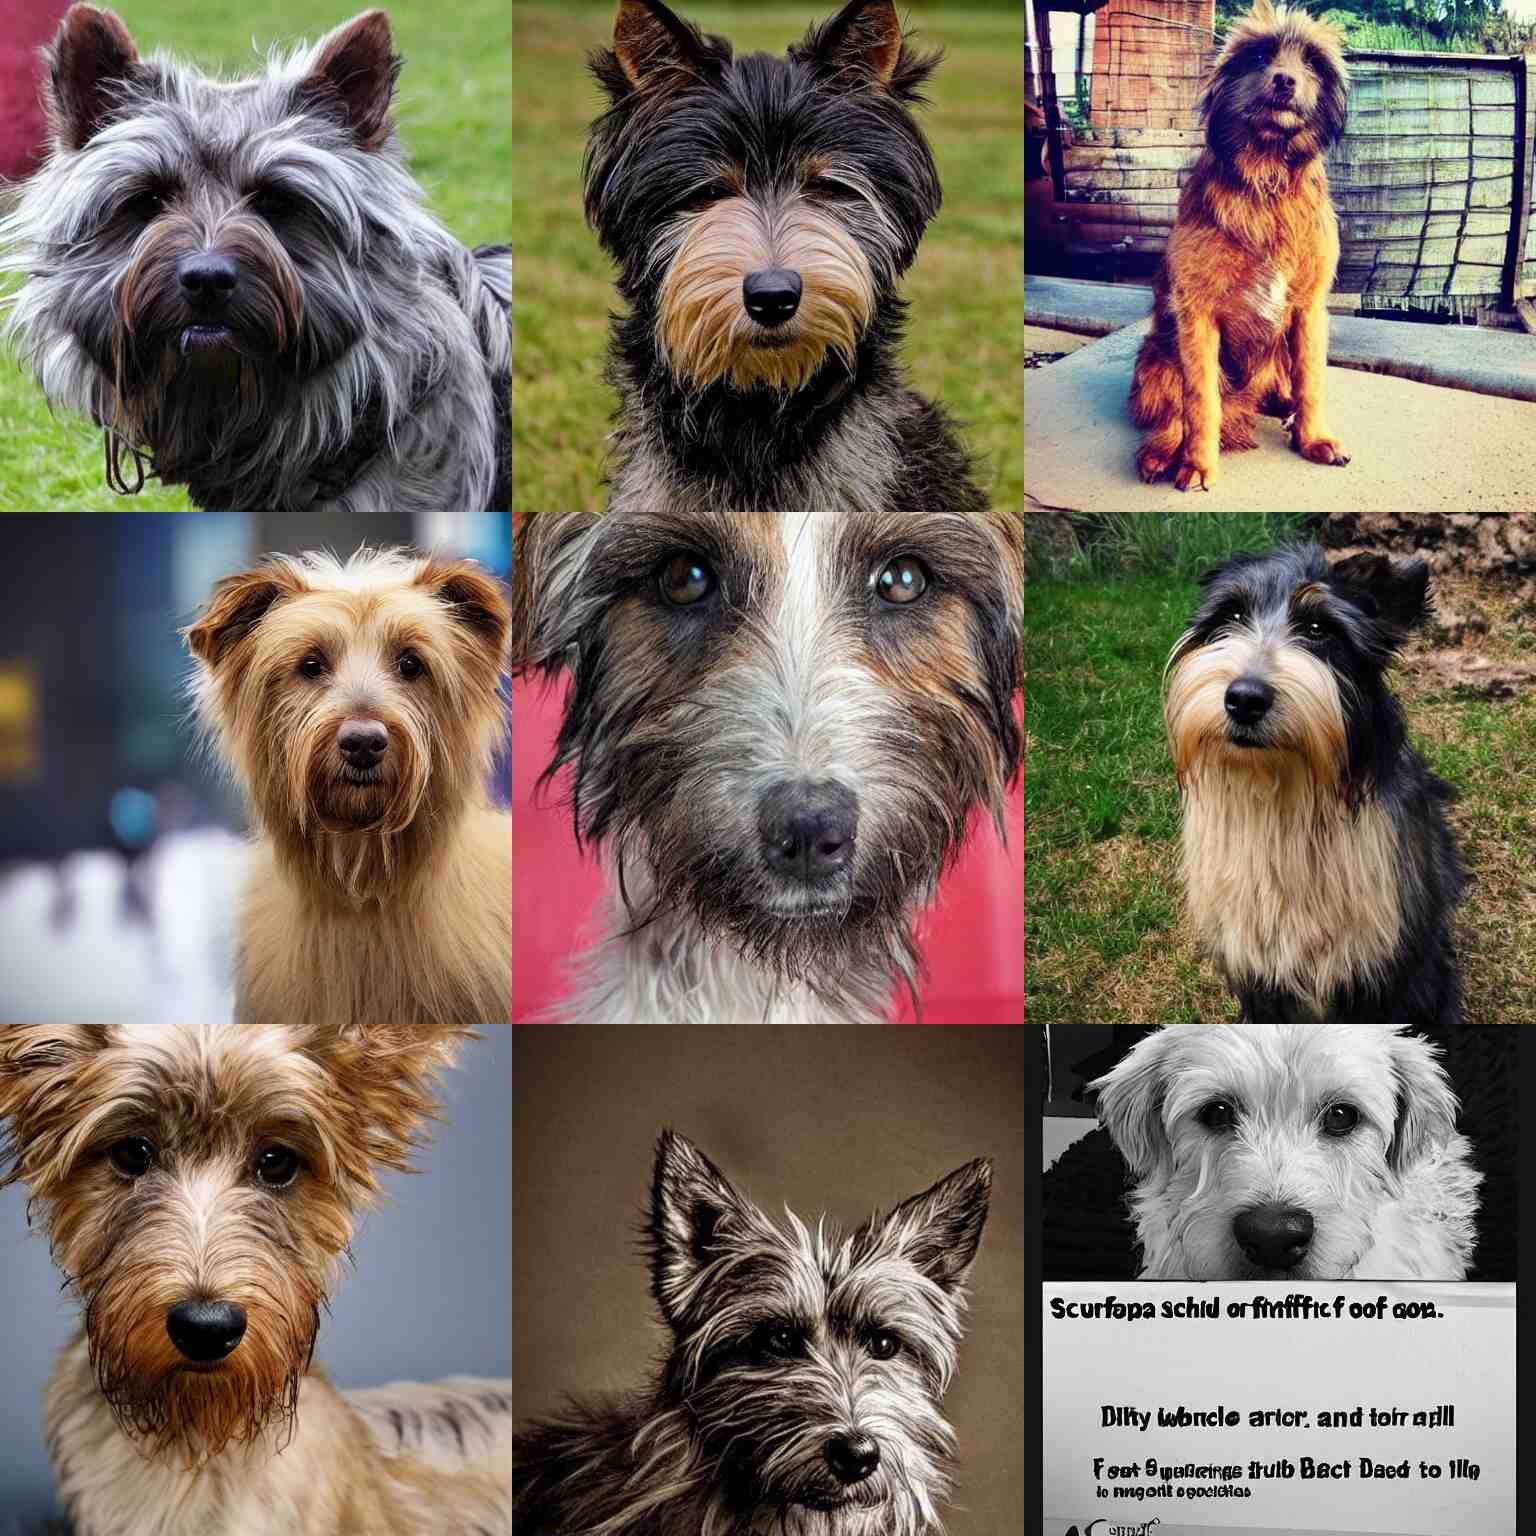 Is It Possible To Do Dog Breed Recognition With An API?